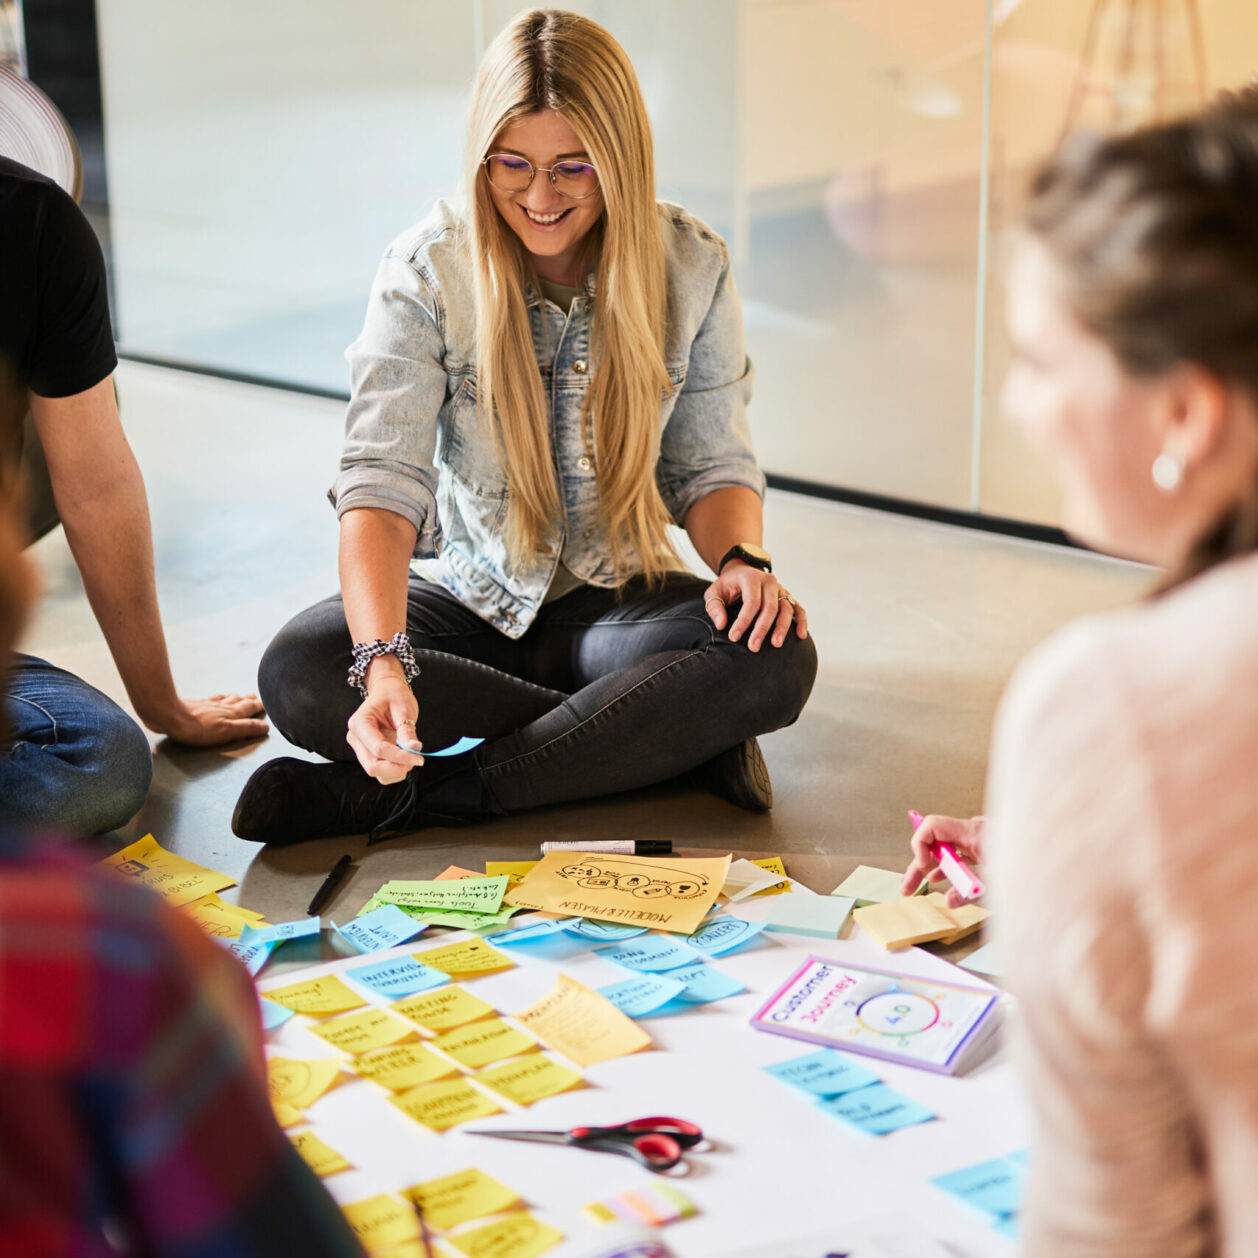 Photo of a blonde young woman sitting cross-legged on the floor and sticking Post-its on a large poster.